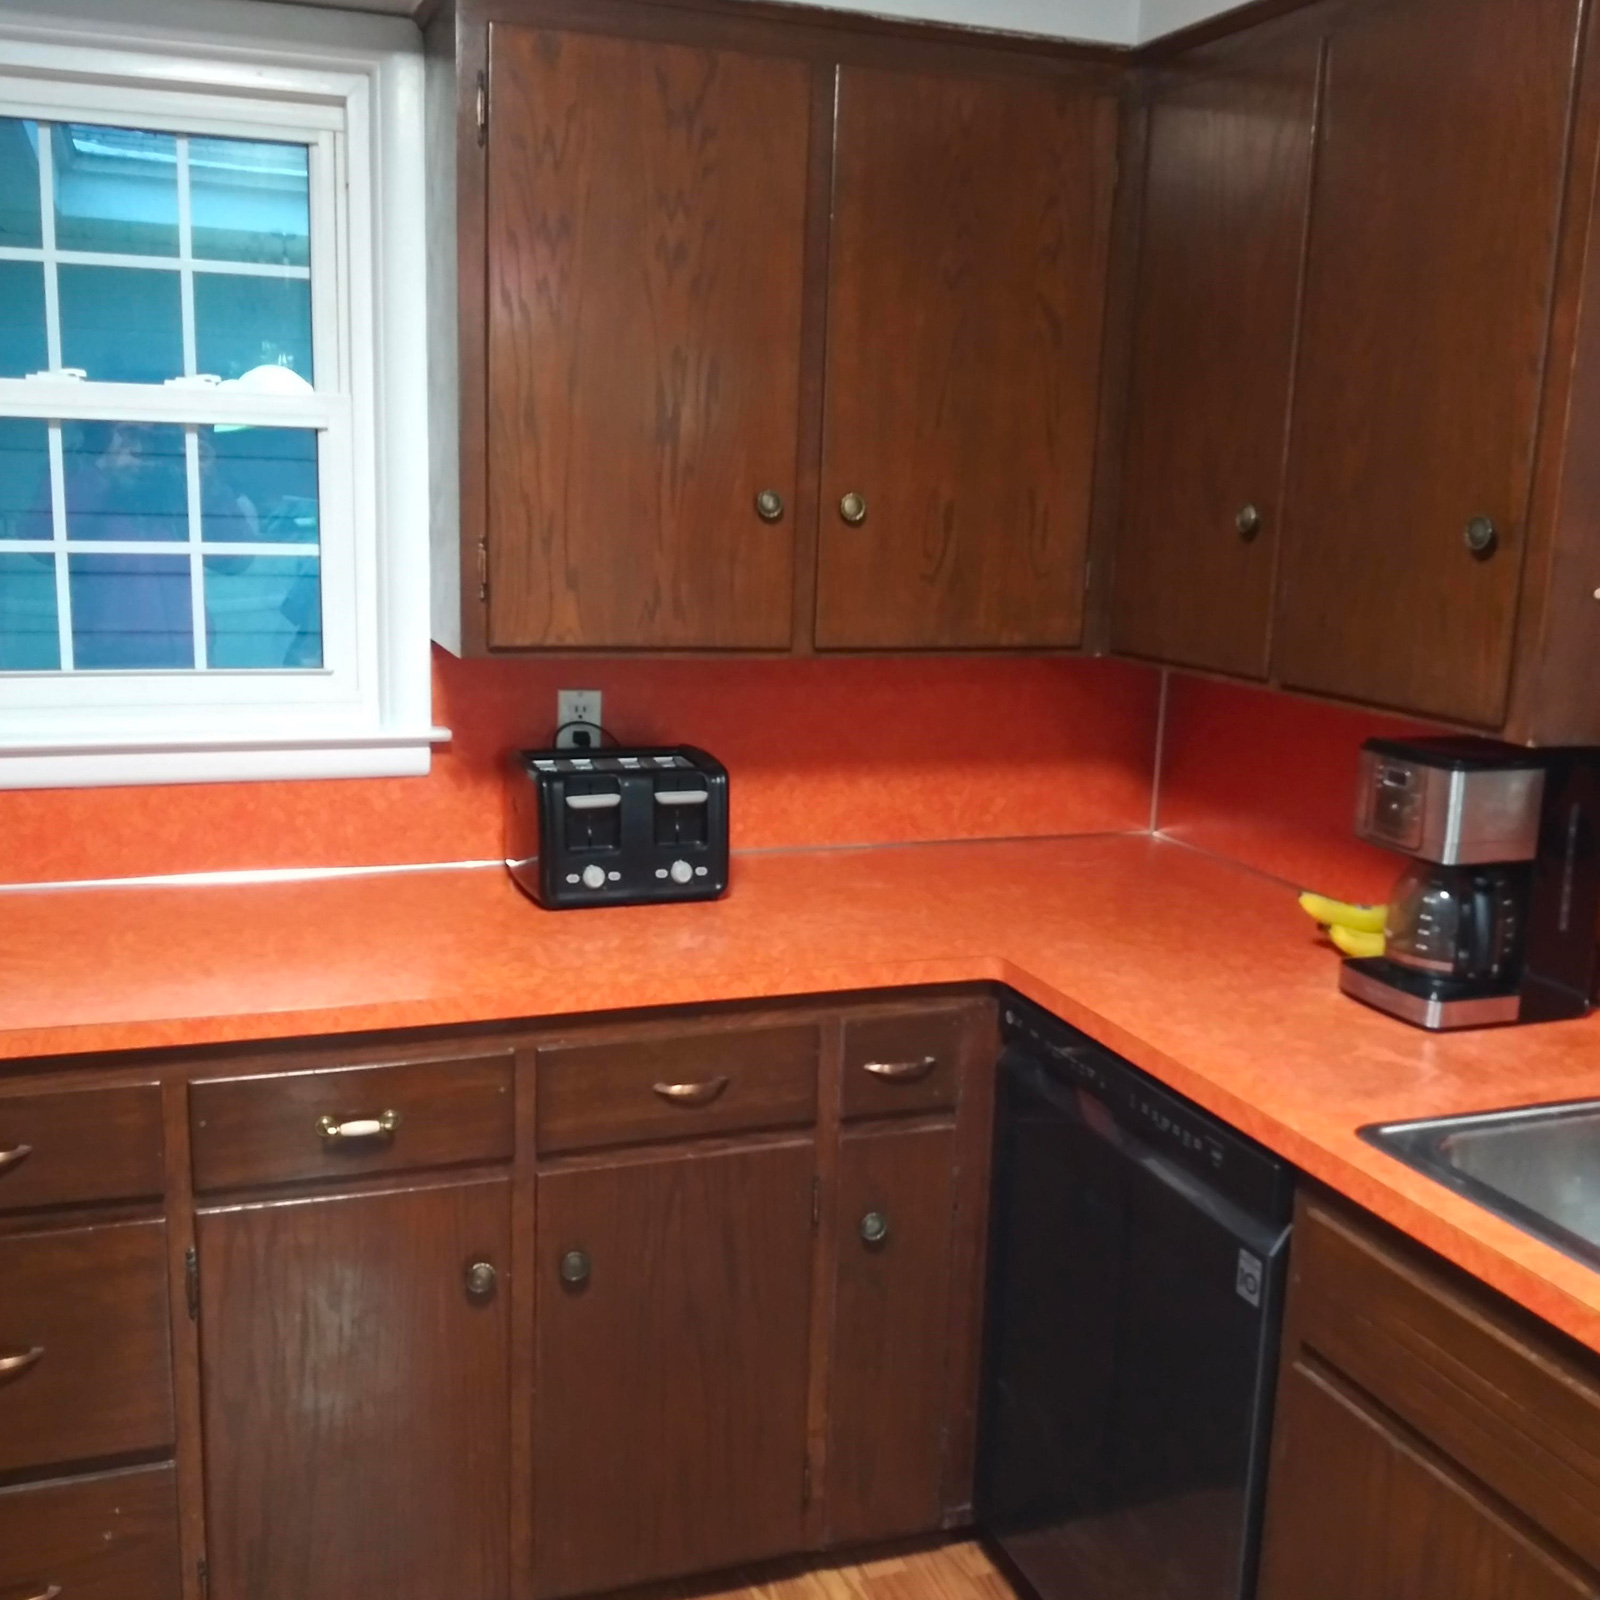 Entry 127 - This orange countertop & out of date cabinetry really date this kitchen